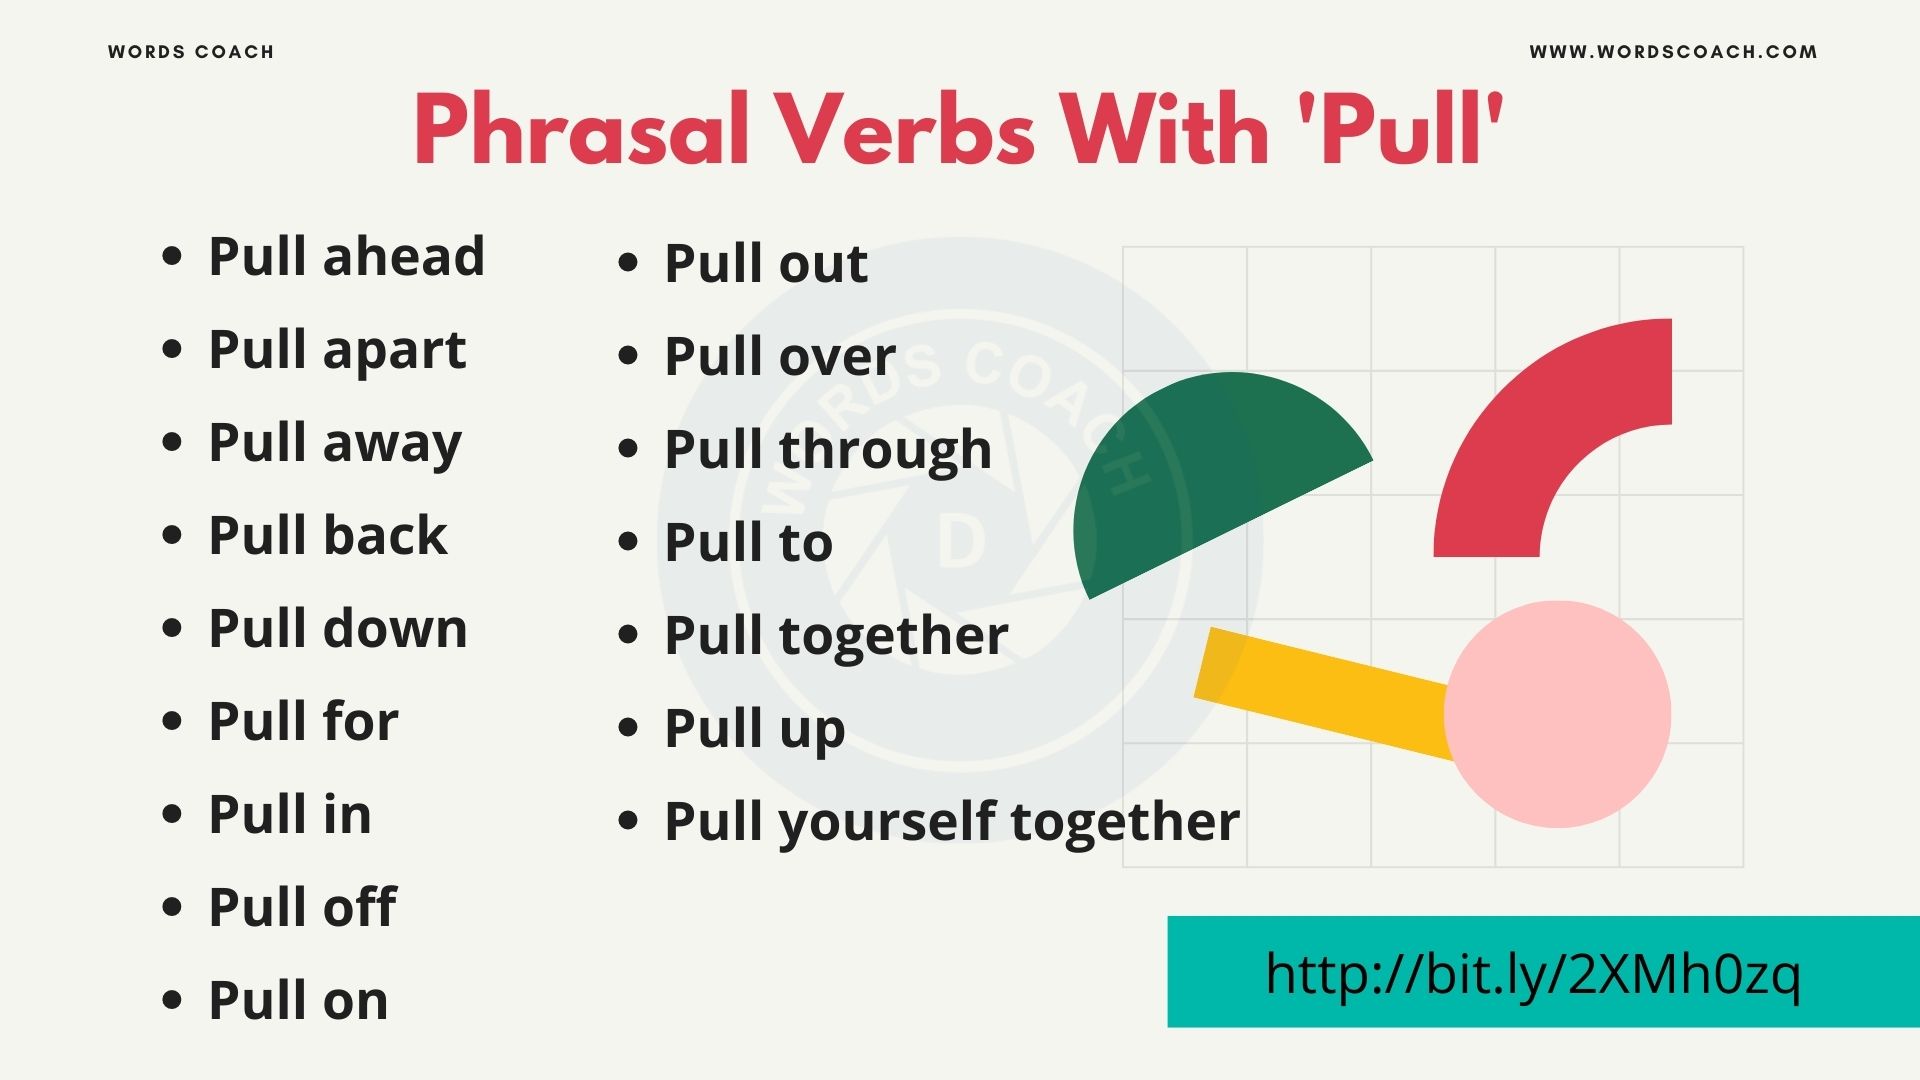 Phrasal Verbs With 'Pull'